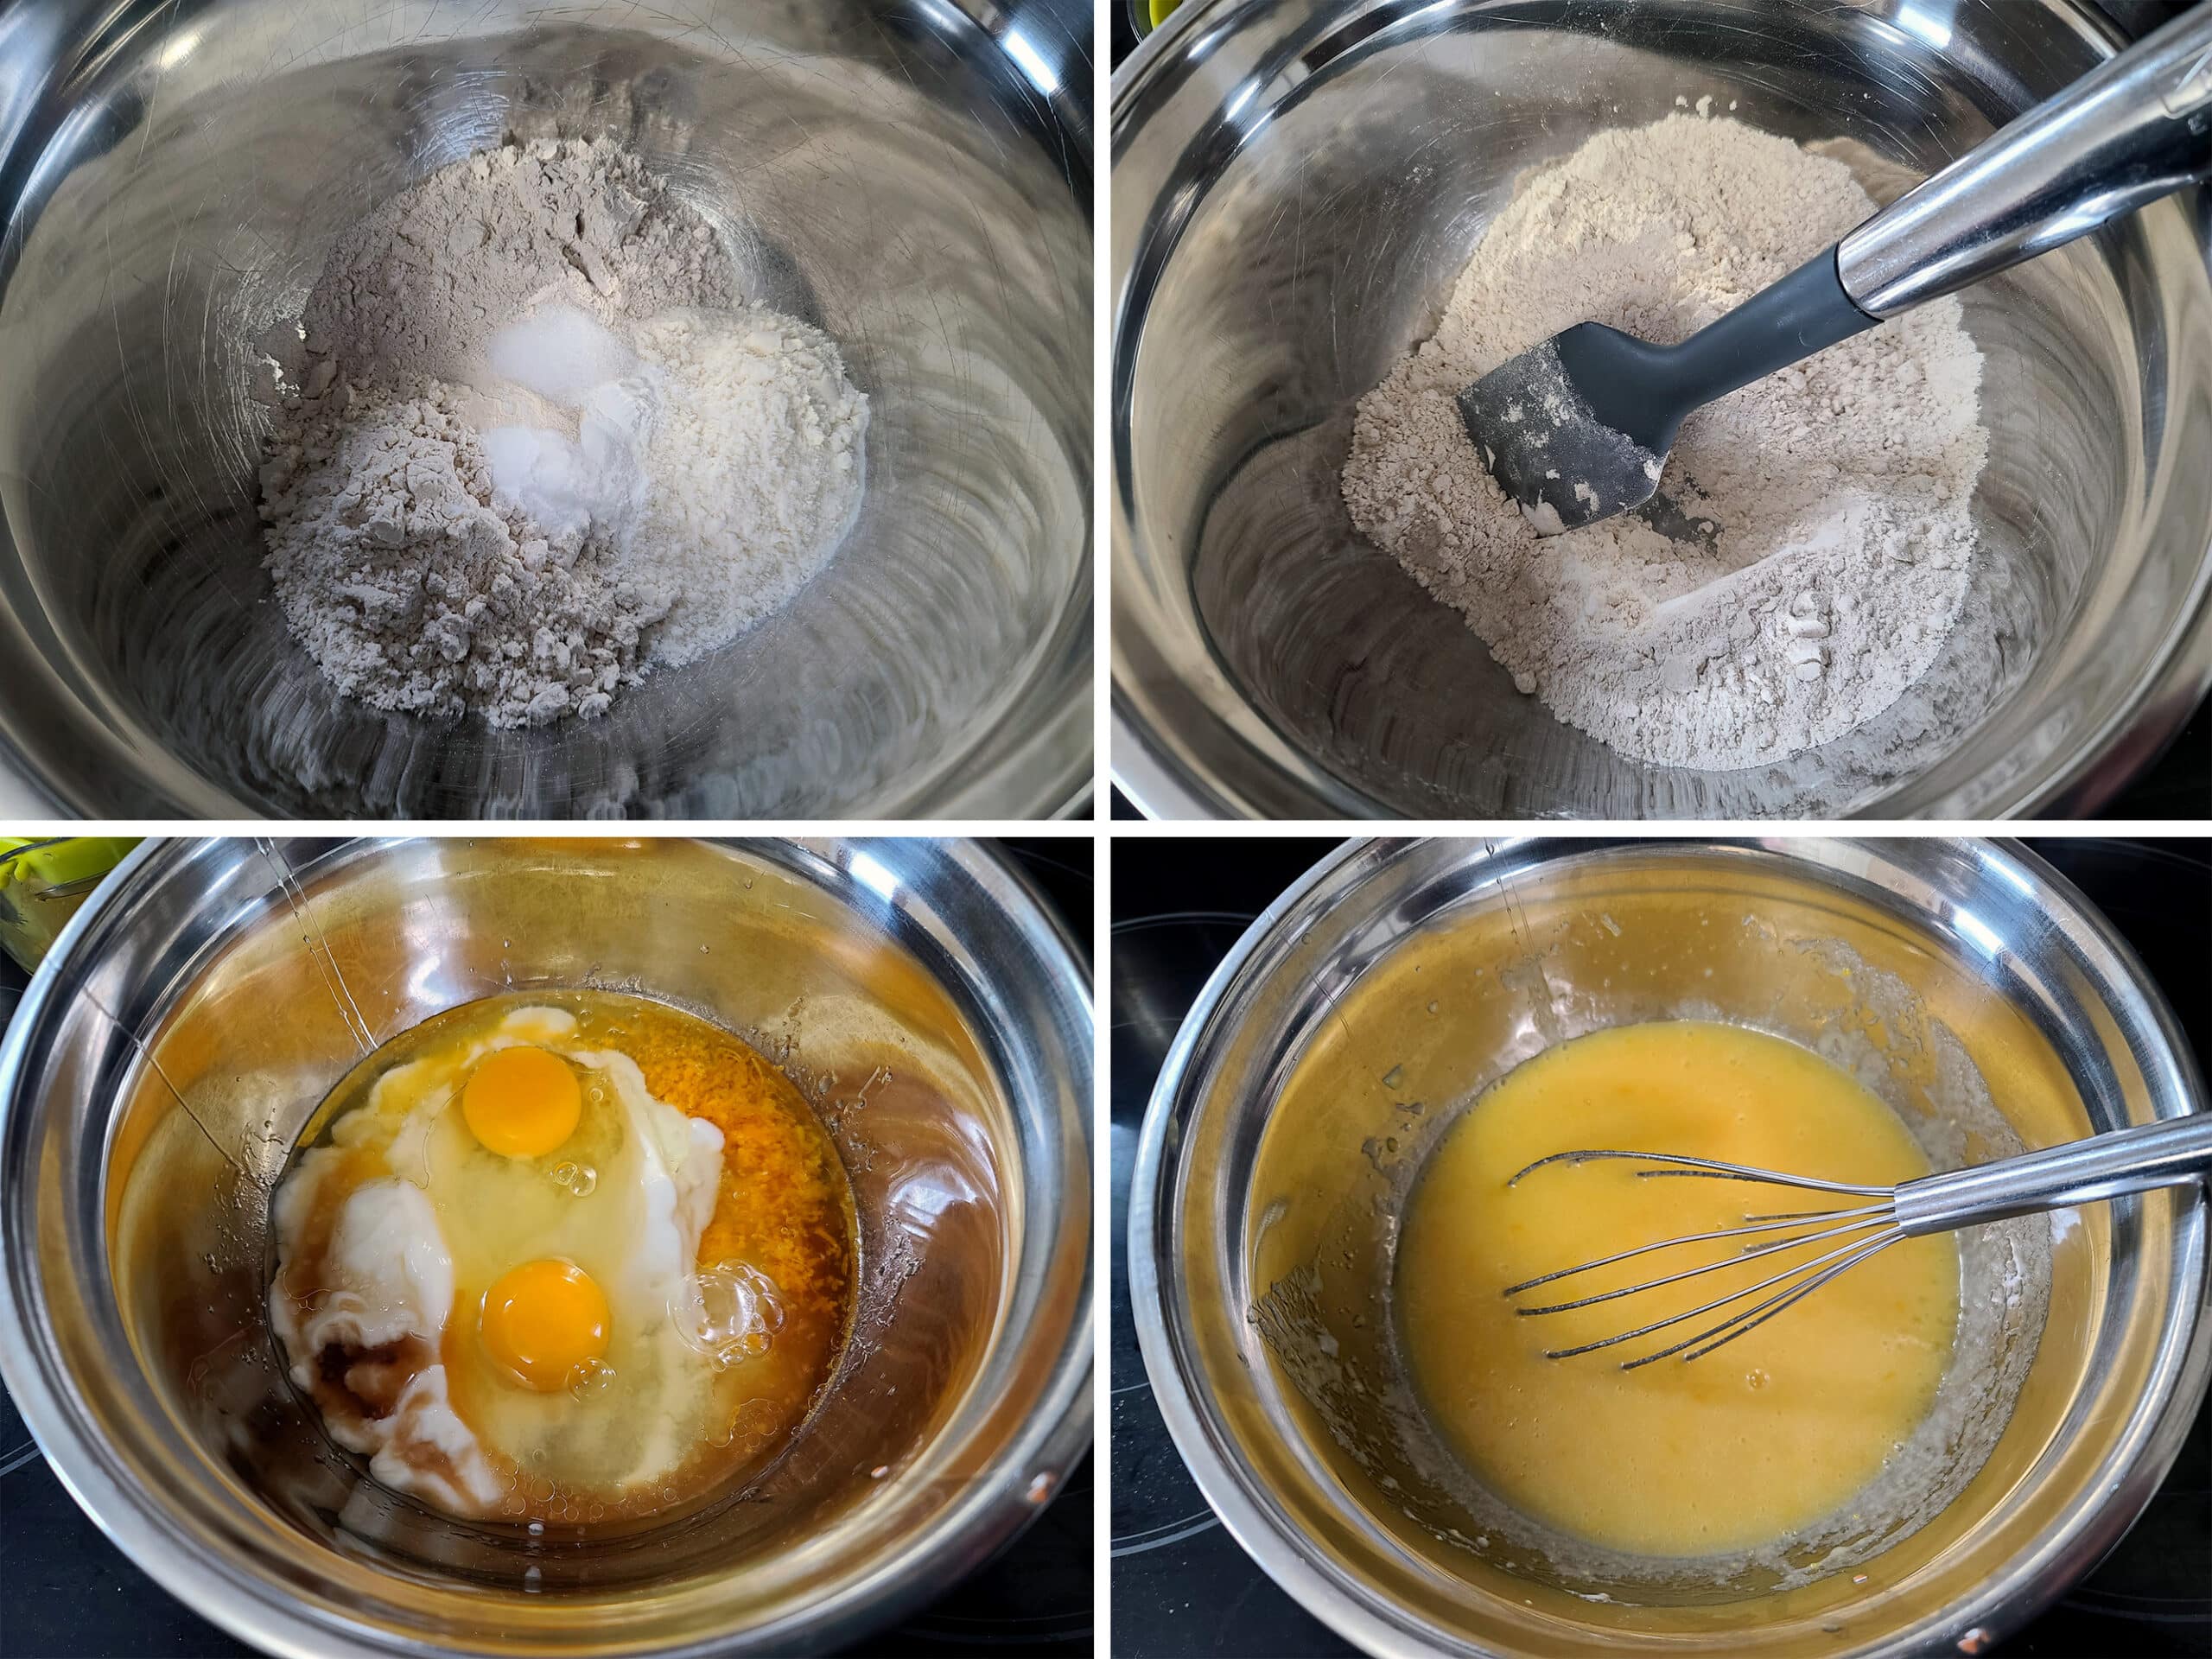 A 4 part image showing the wet ingredients and dry ingredients being mixed in separate bowls.